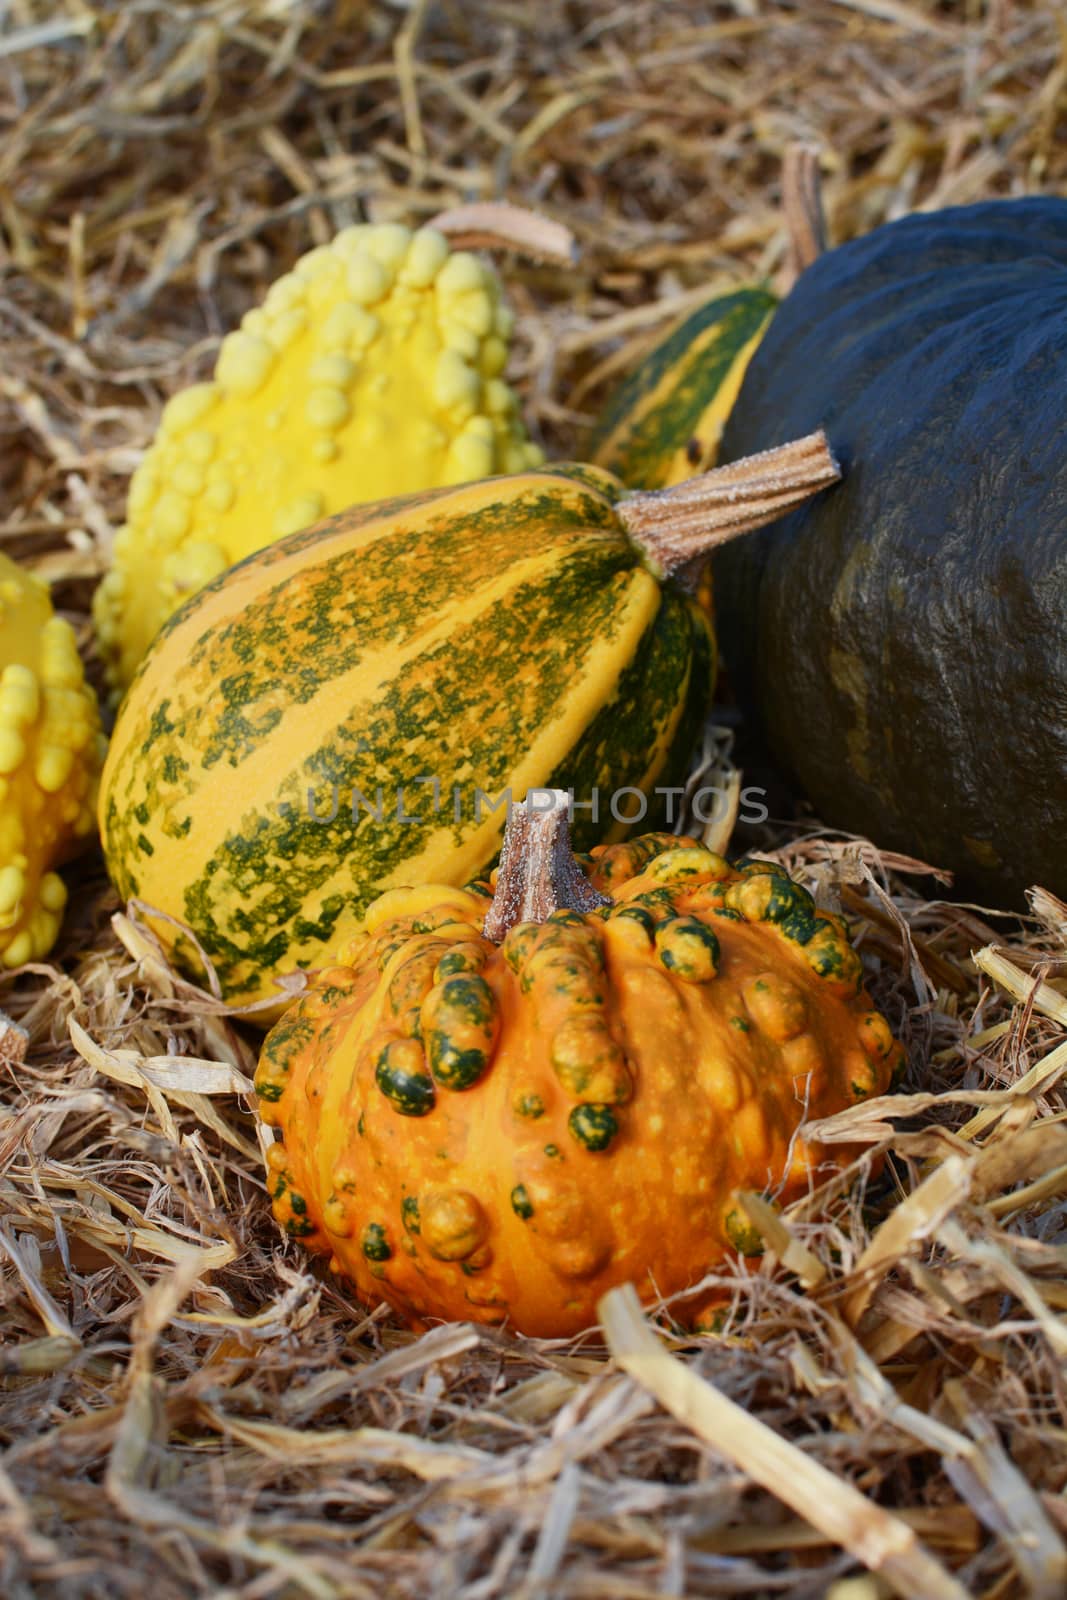 Orange and green warted gourd in front of ornamental gourds by sarahdoow